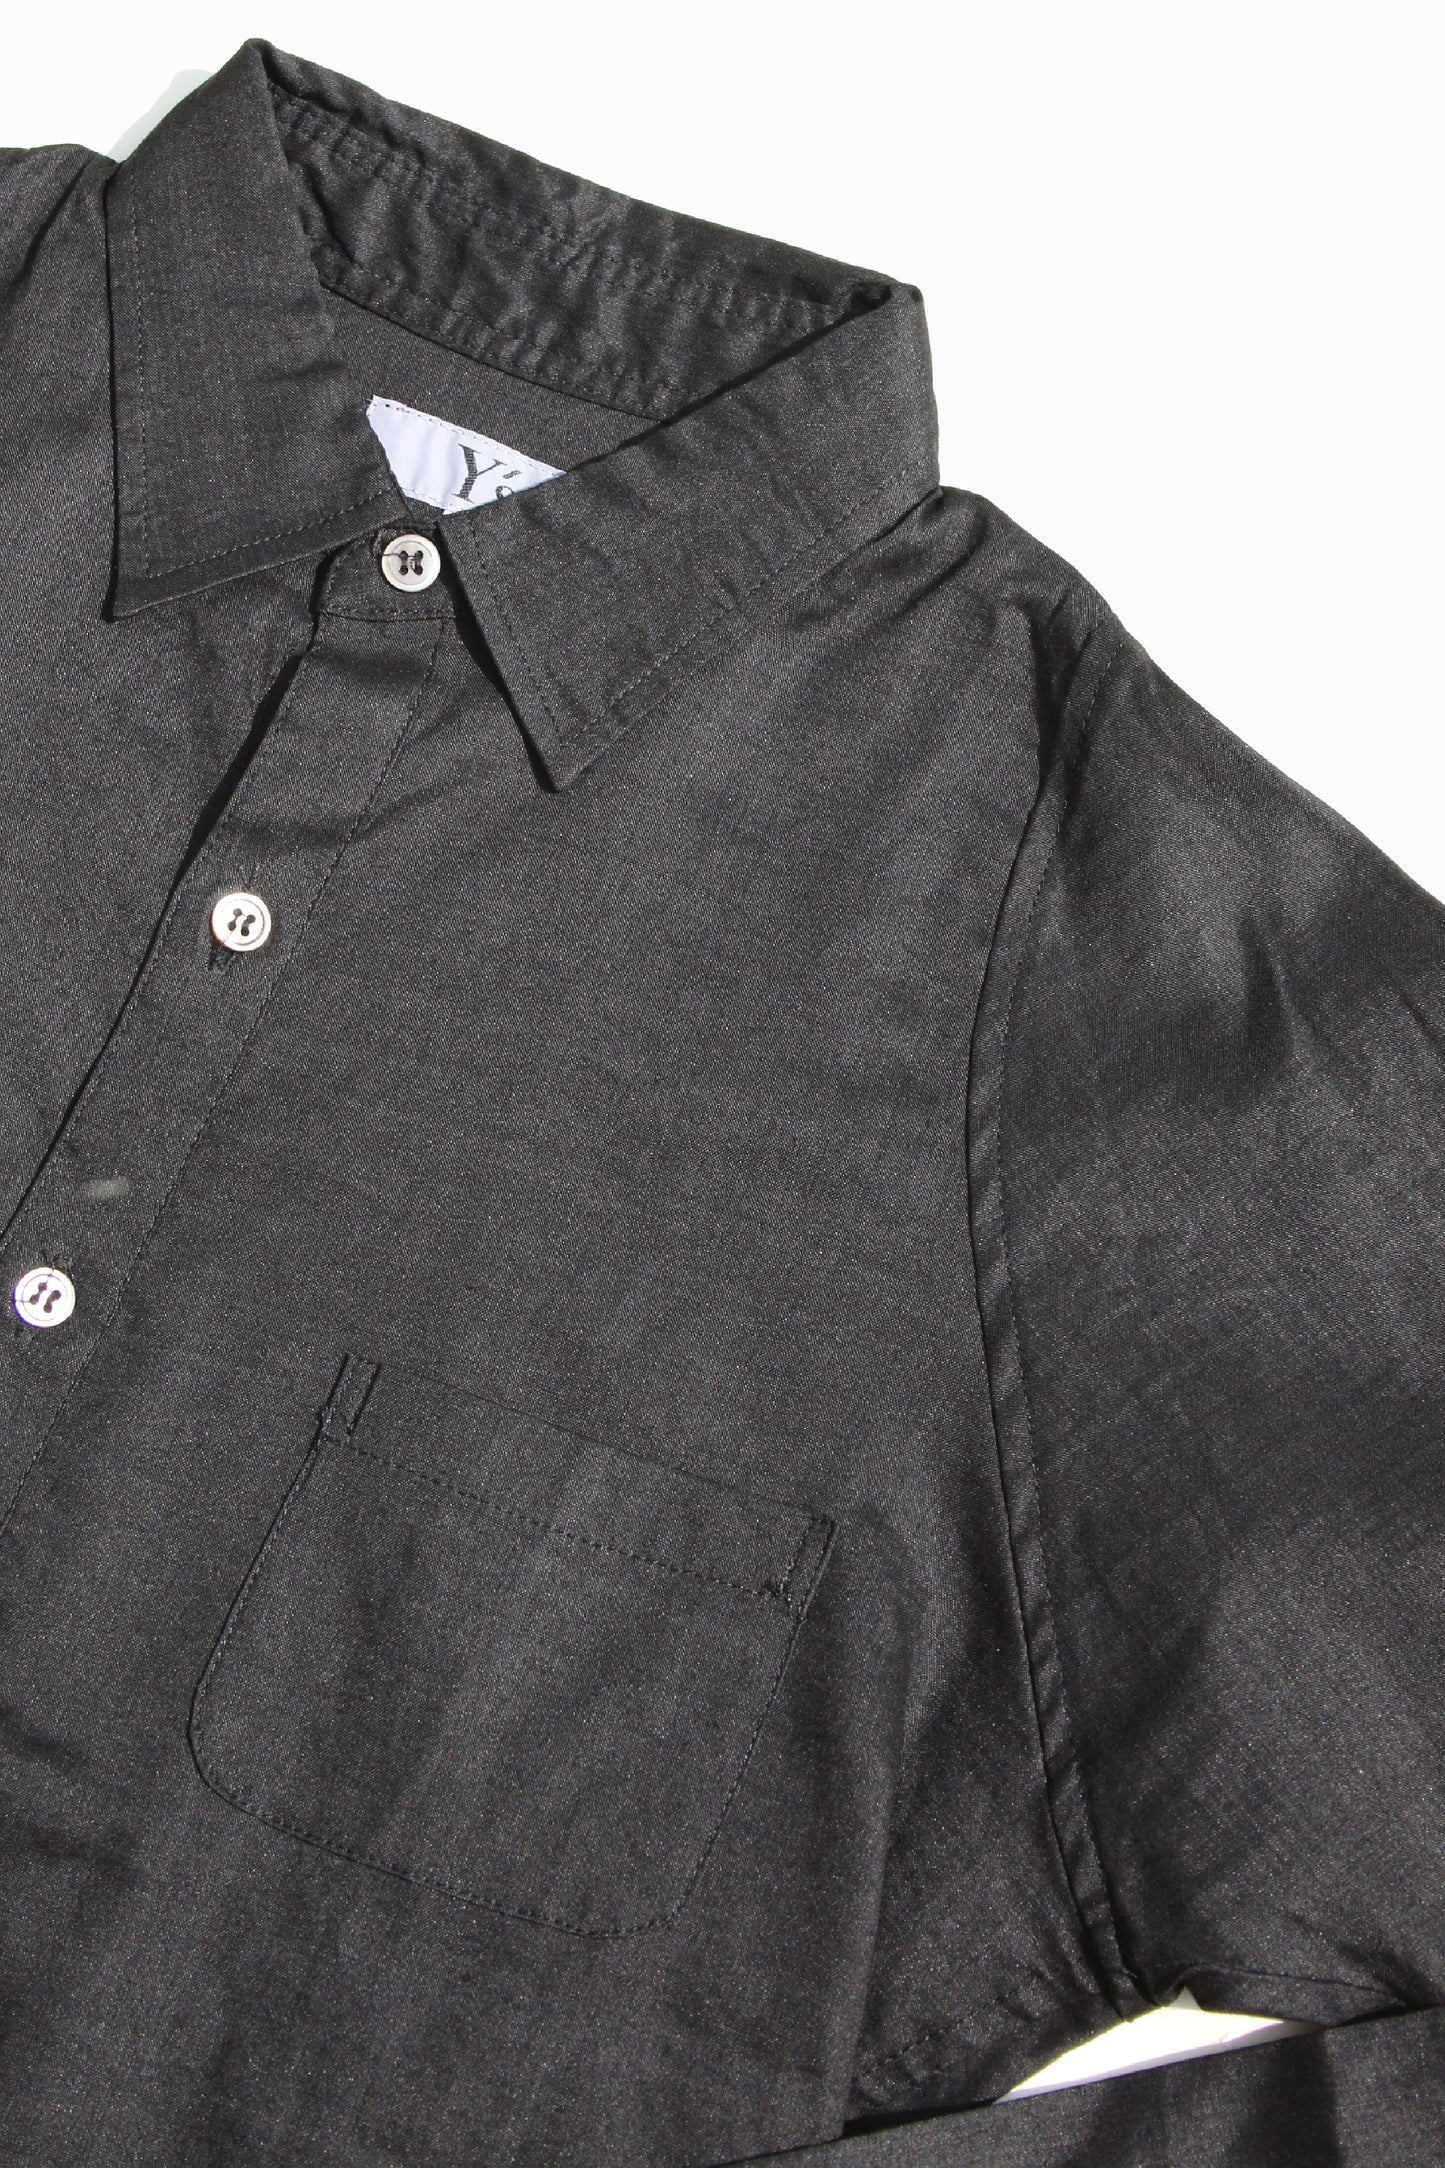 VINTAGE Y's BUTTON SLEEVE LINEN RAYON SHIRT BLACK